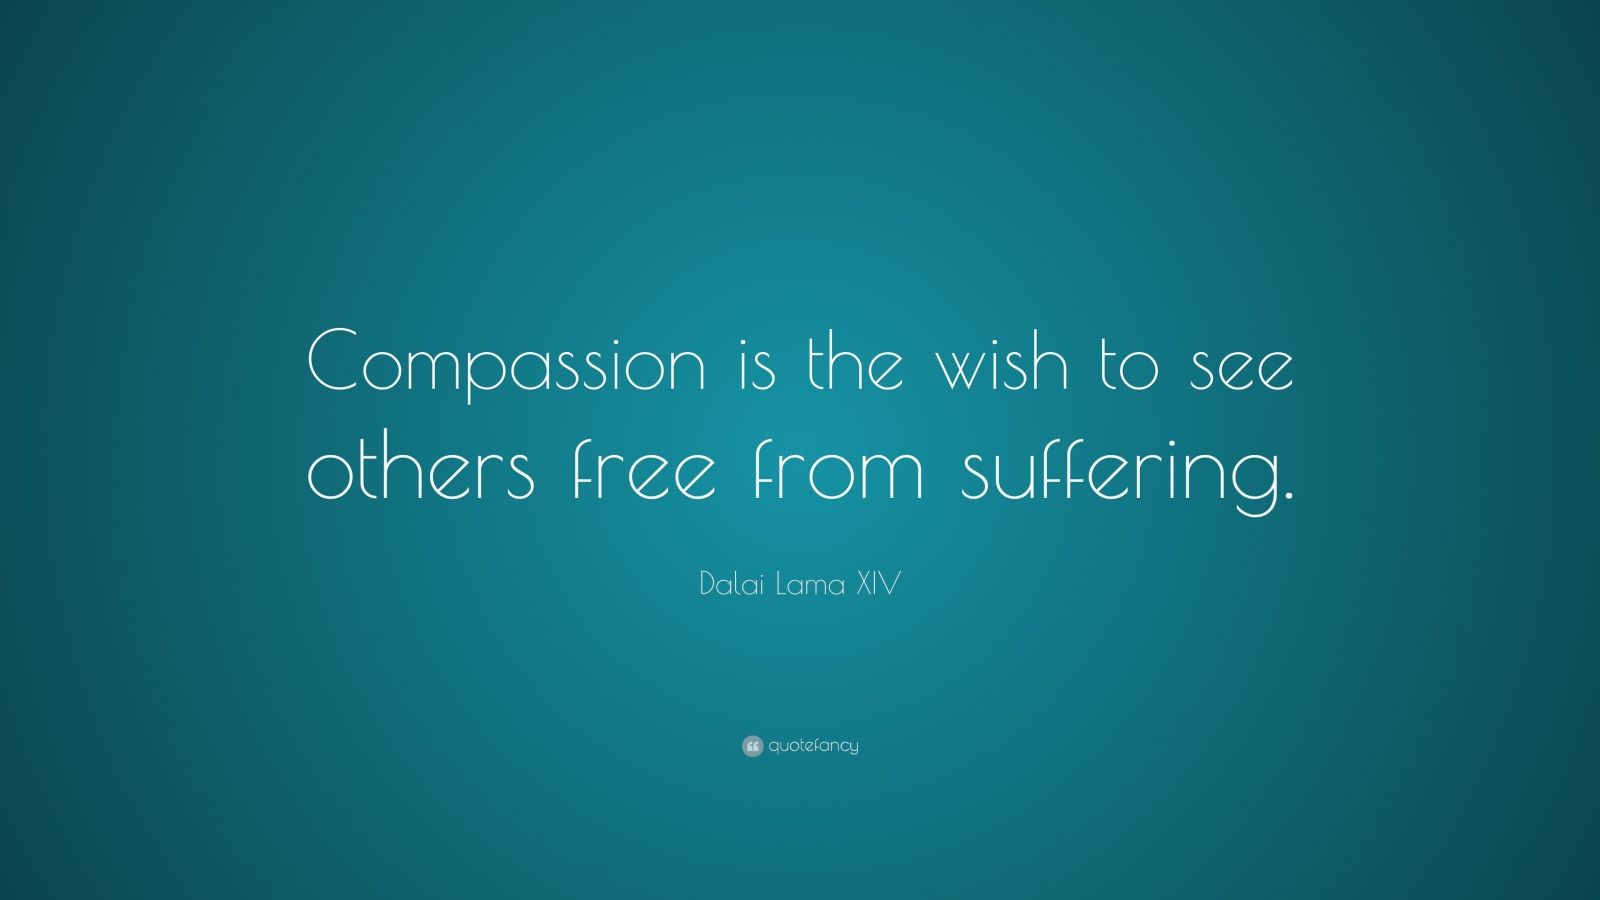 Dalai Lama XIV Quote: “Compassion is the wish to see others free from